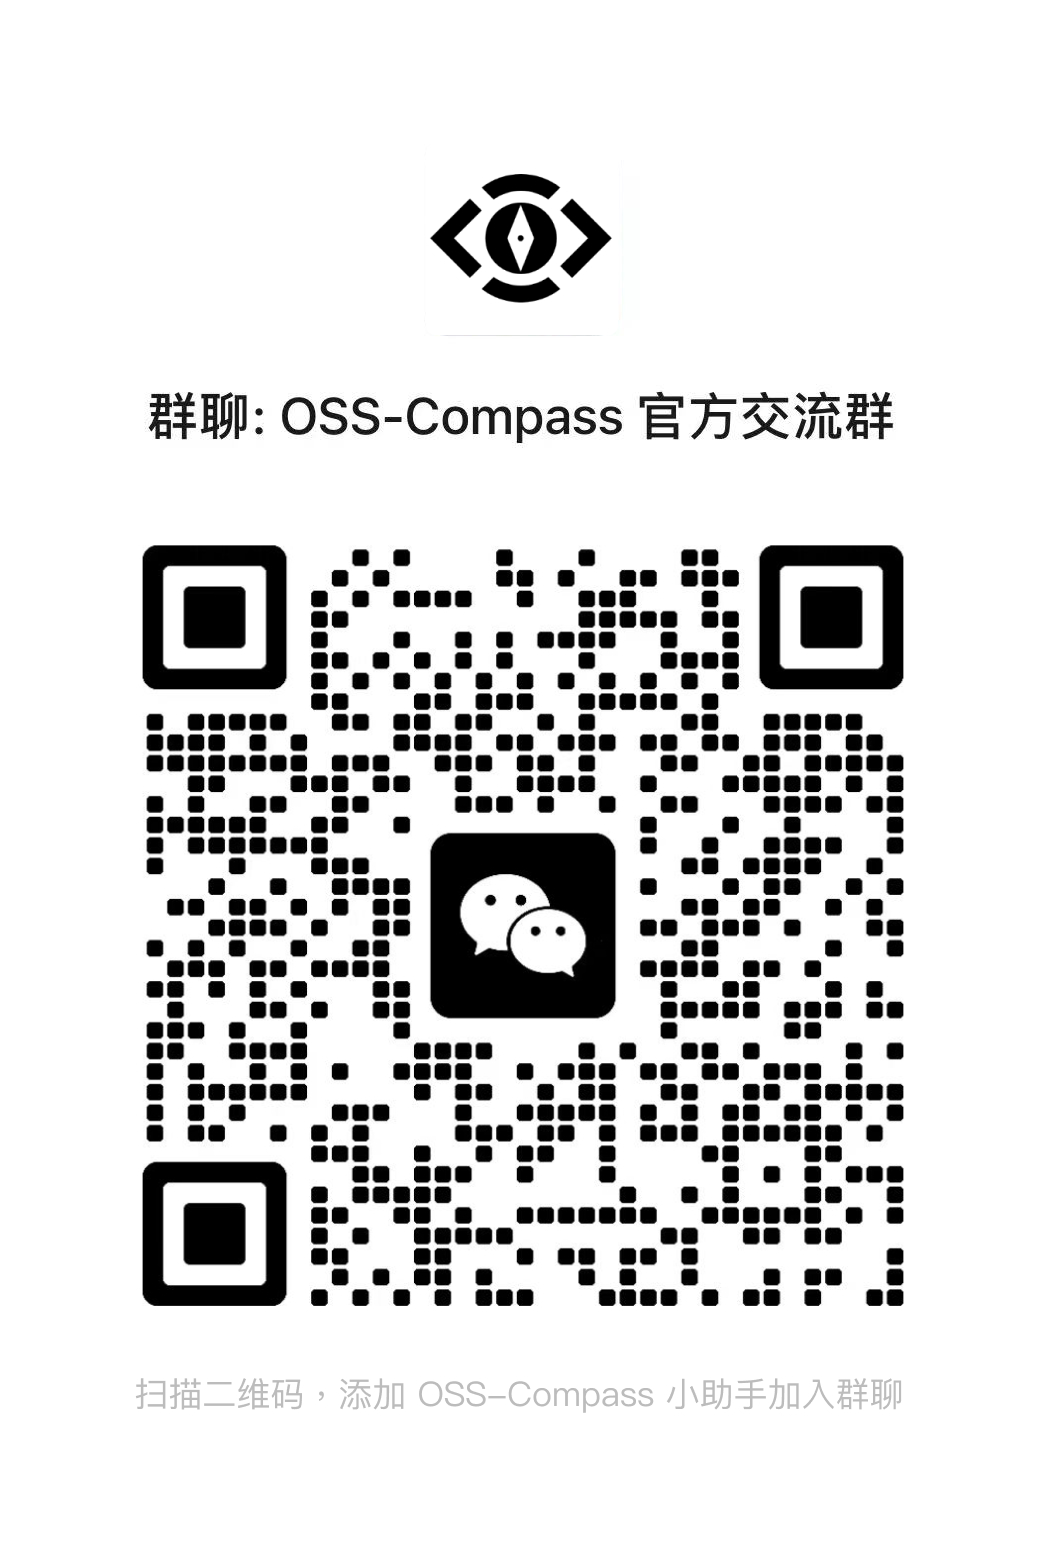 Join Community on WeChat